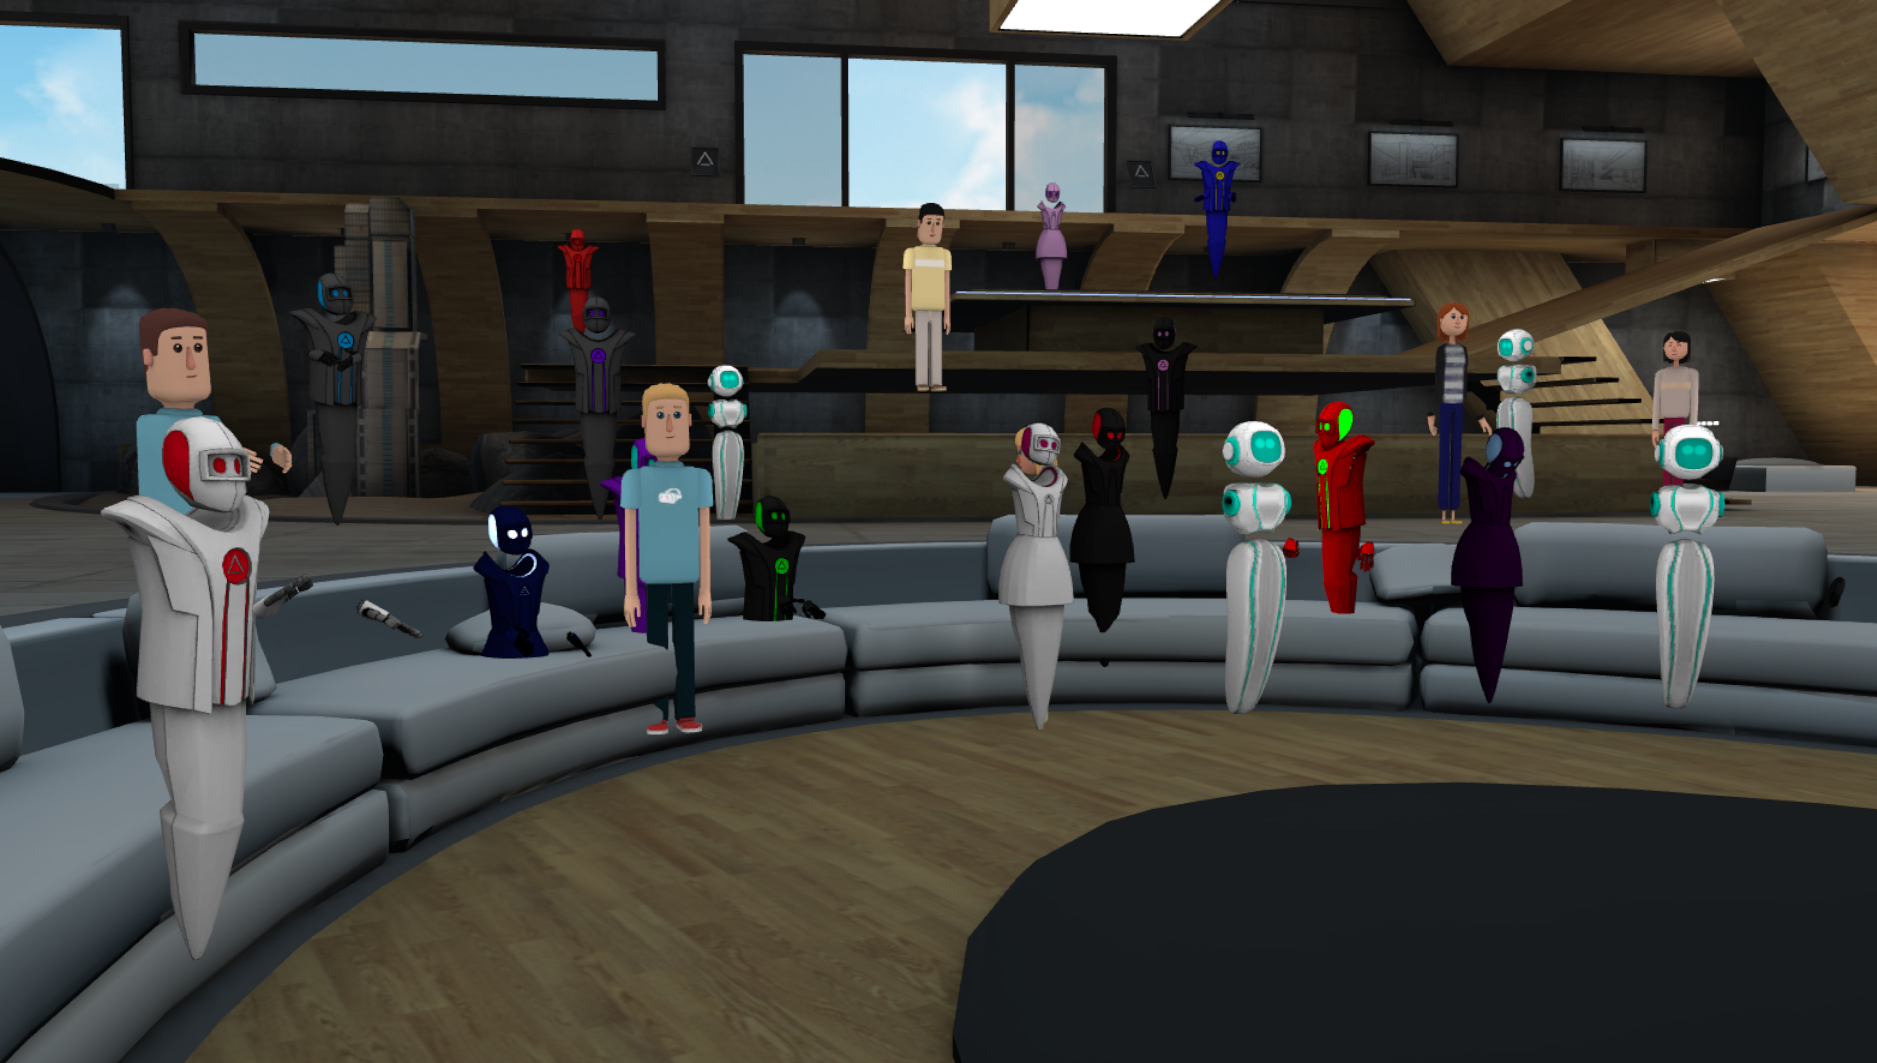 How to hold a meeting in virtual reality - AltspaceVR - Medium